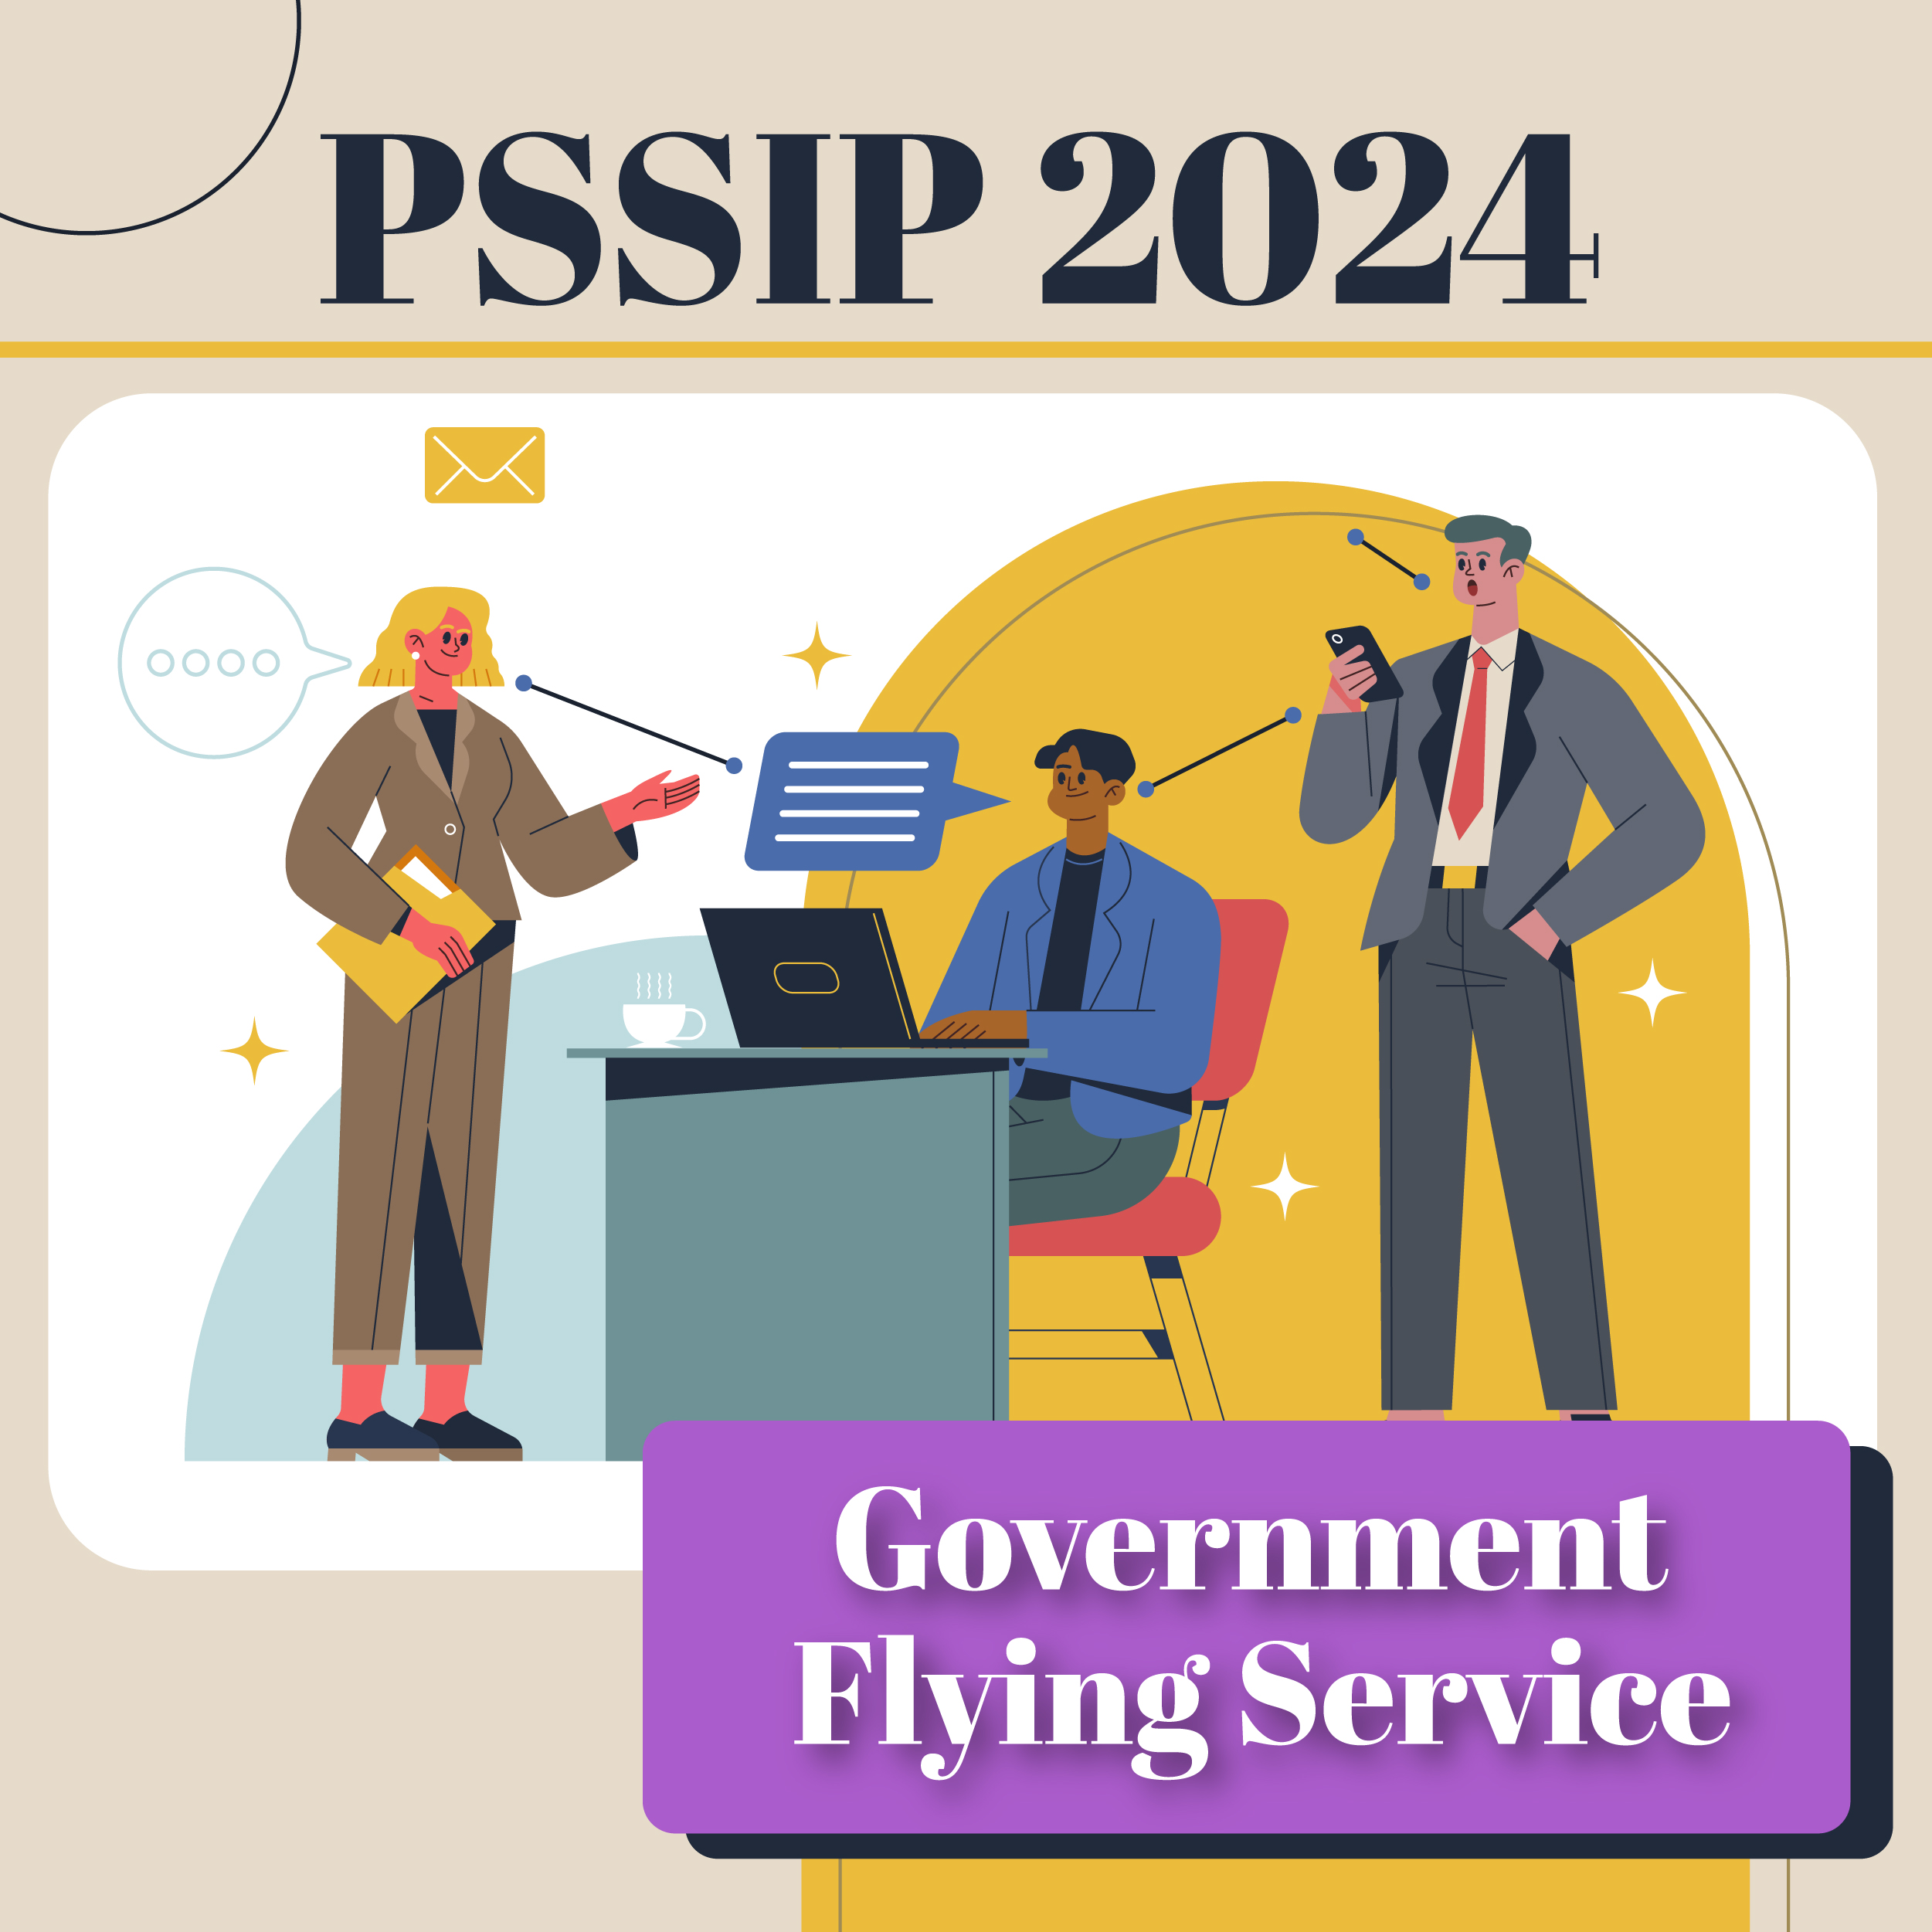 PSSIP2024 – Government Flying Service